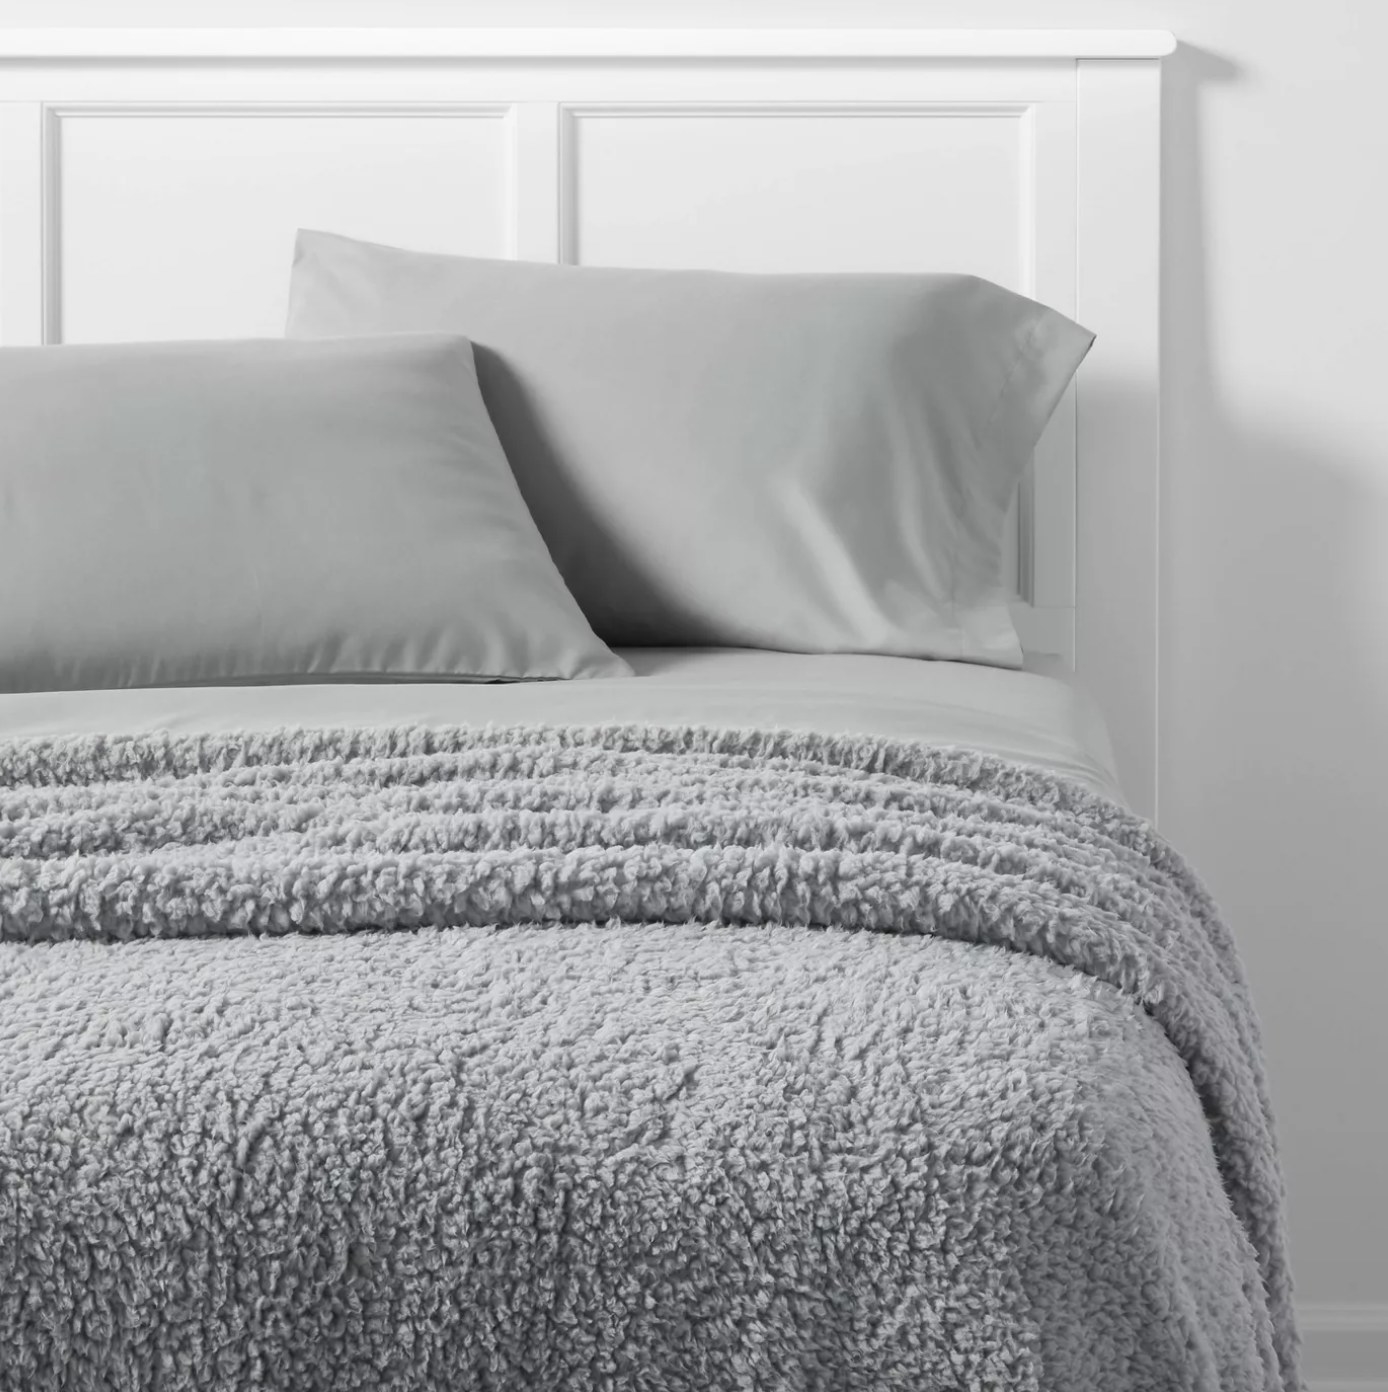 The grey sherpa blanket is on a bed with grey sheets and a white headboard